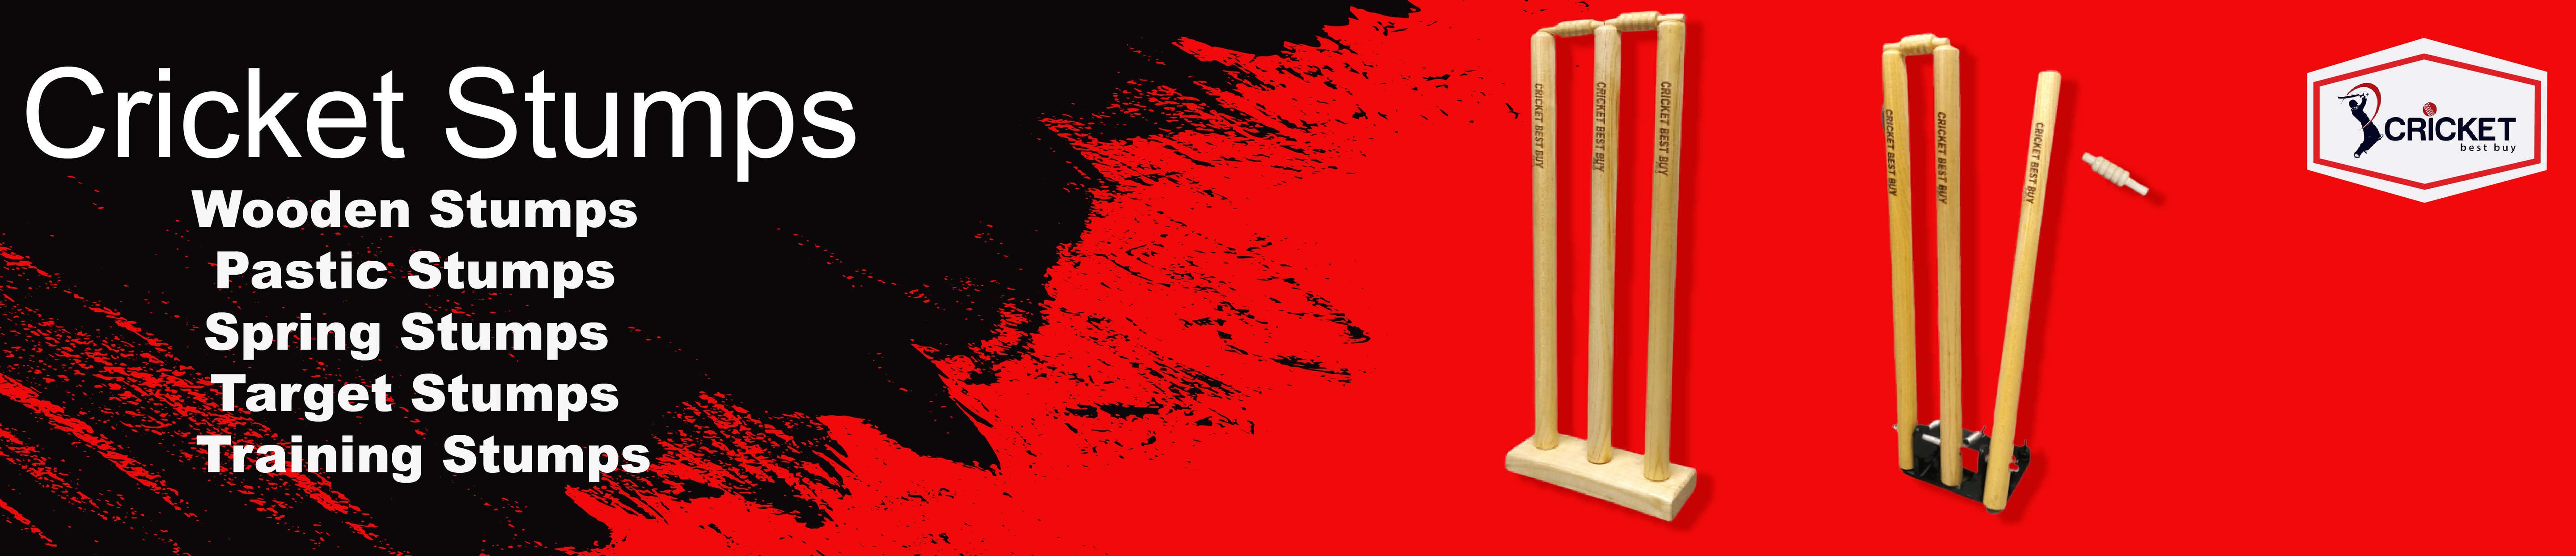 Cricket Stumps  Collection Banner Image